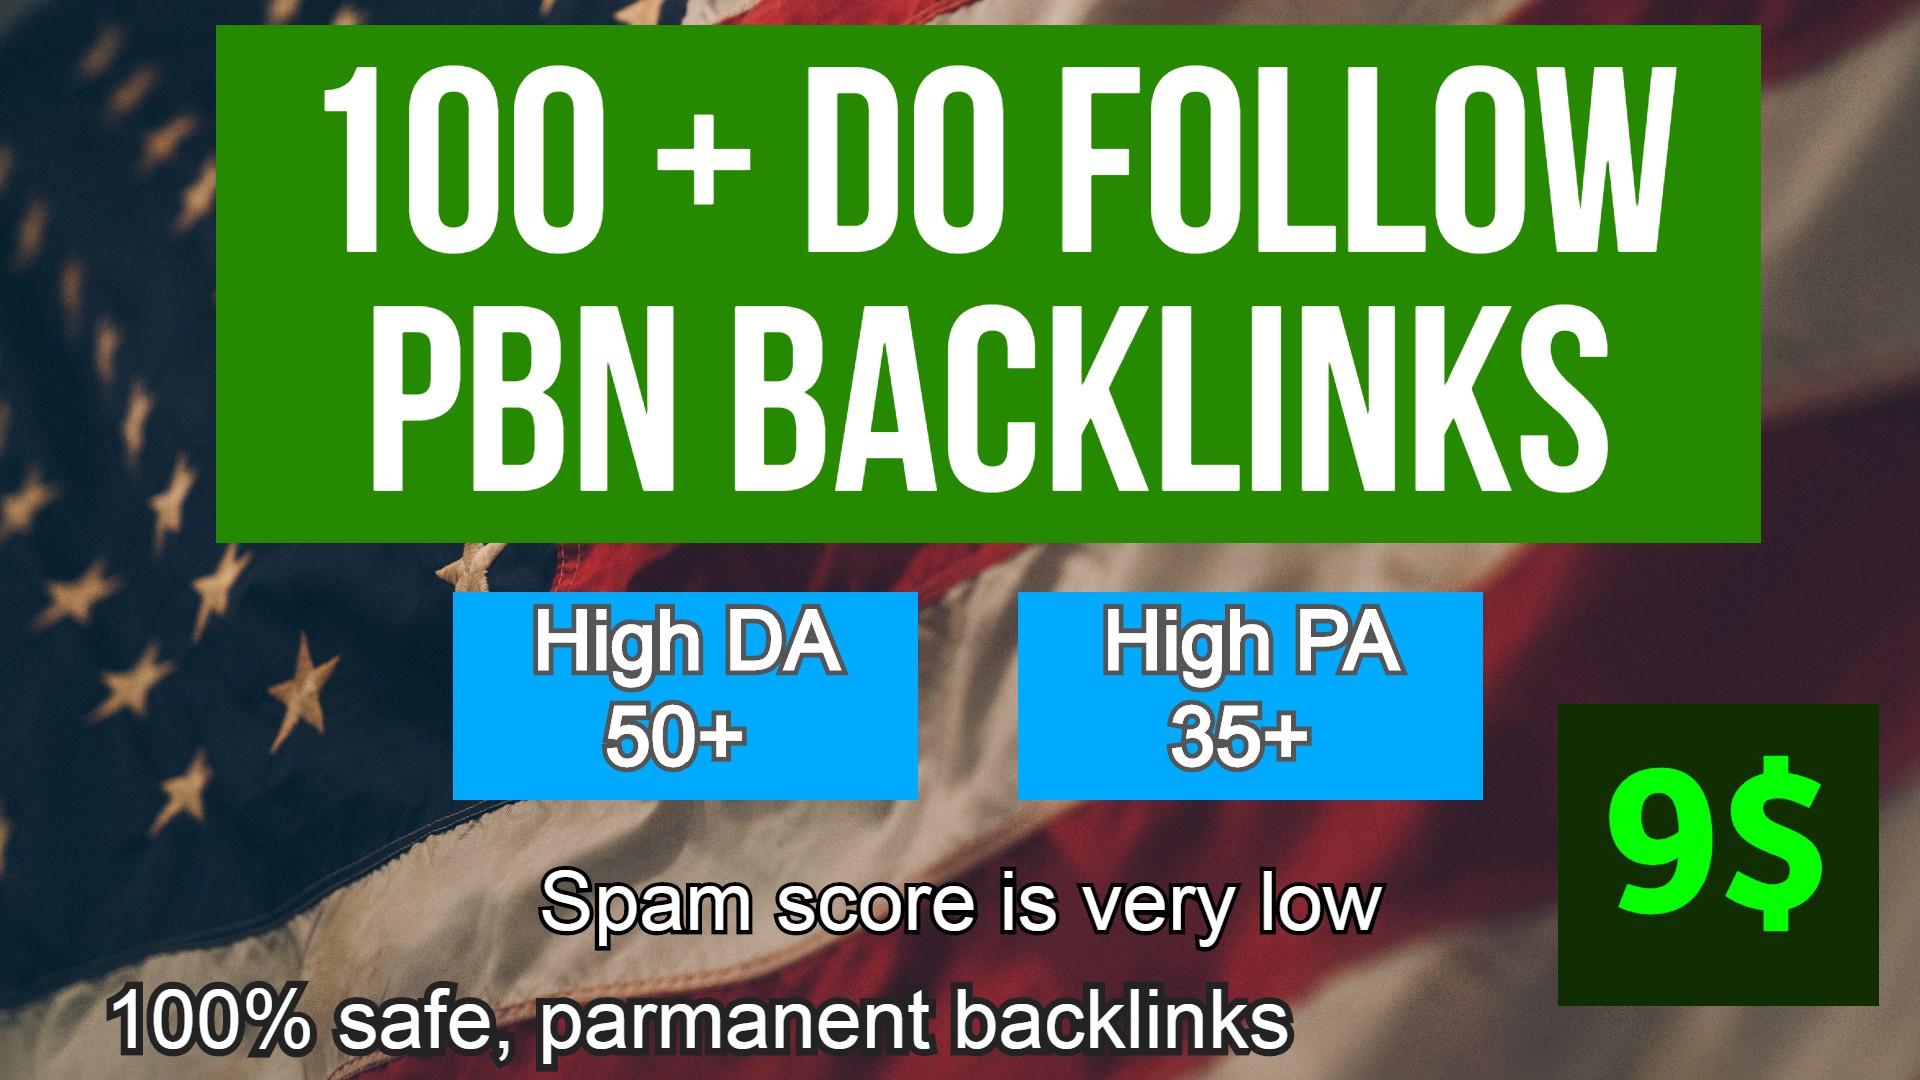 Powerful 100+ Backlink with 50+ DA 35+ PA High Quality unique website link. GET IT NOW!! 